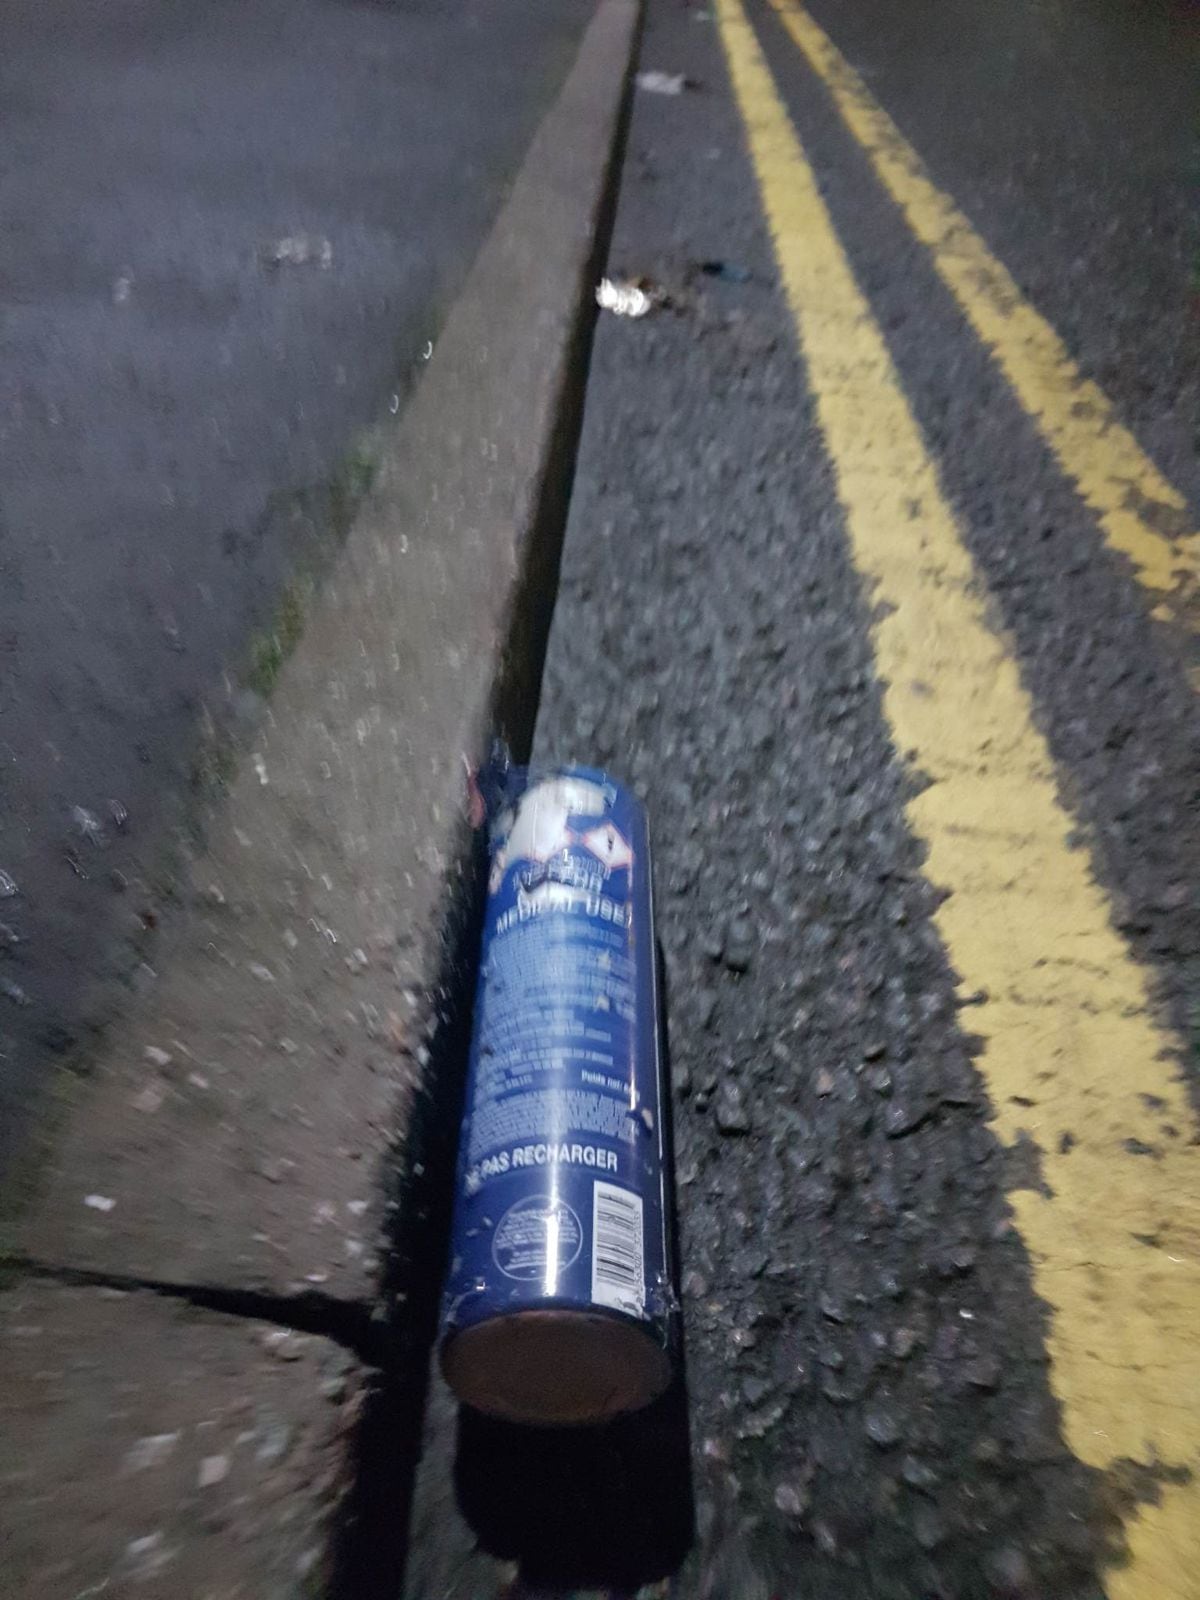 Discarded Smartwhip canister in Smethwick